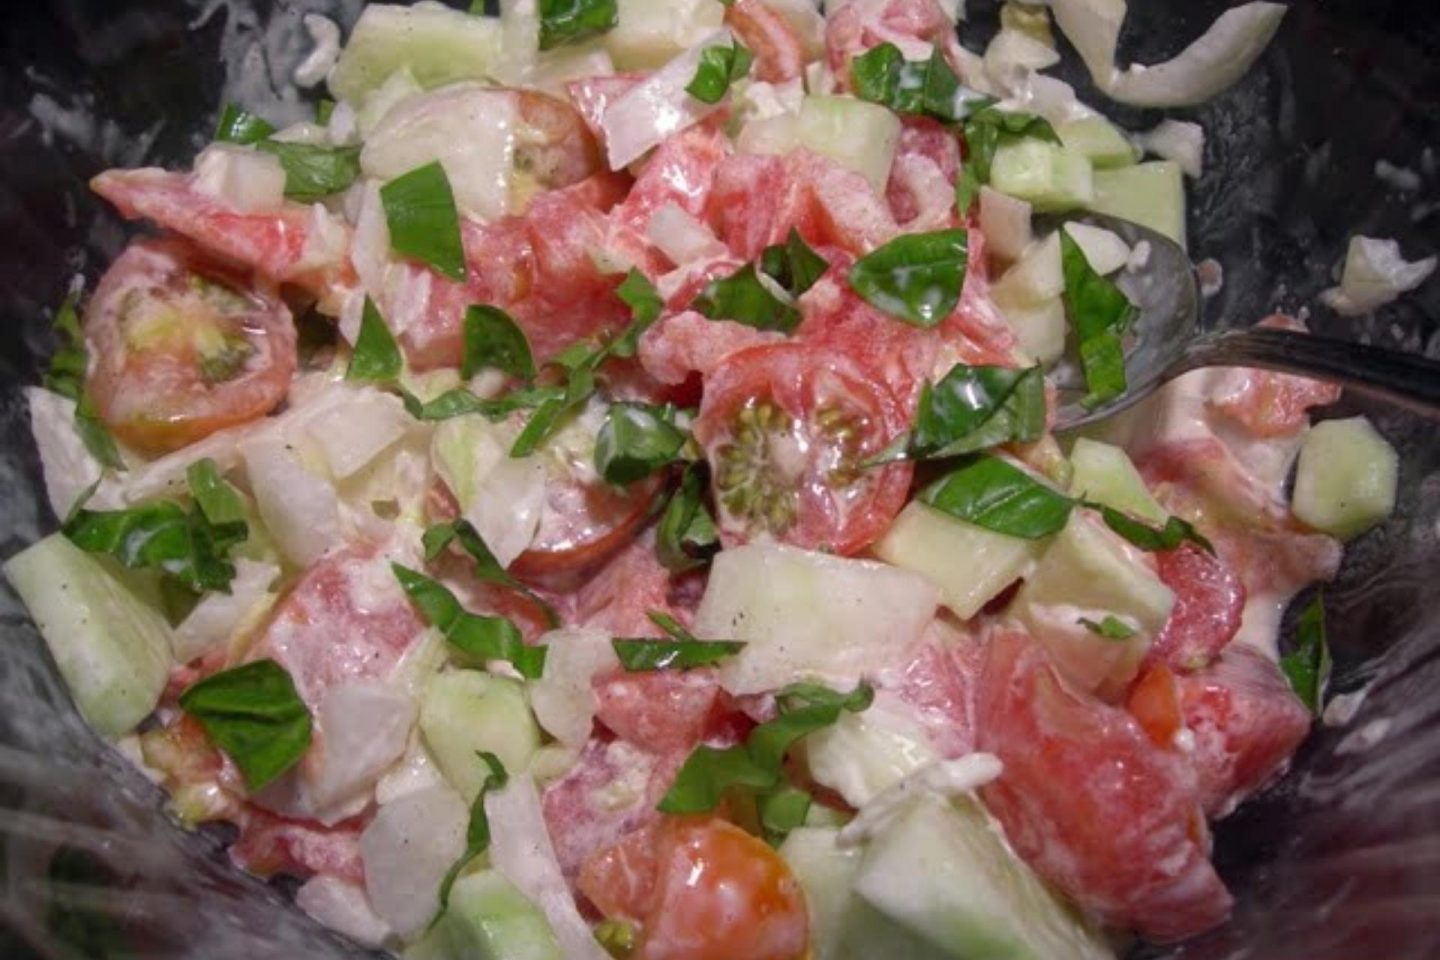 Summer salad with dressing